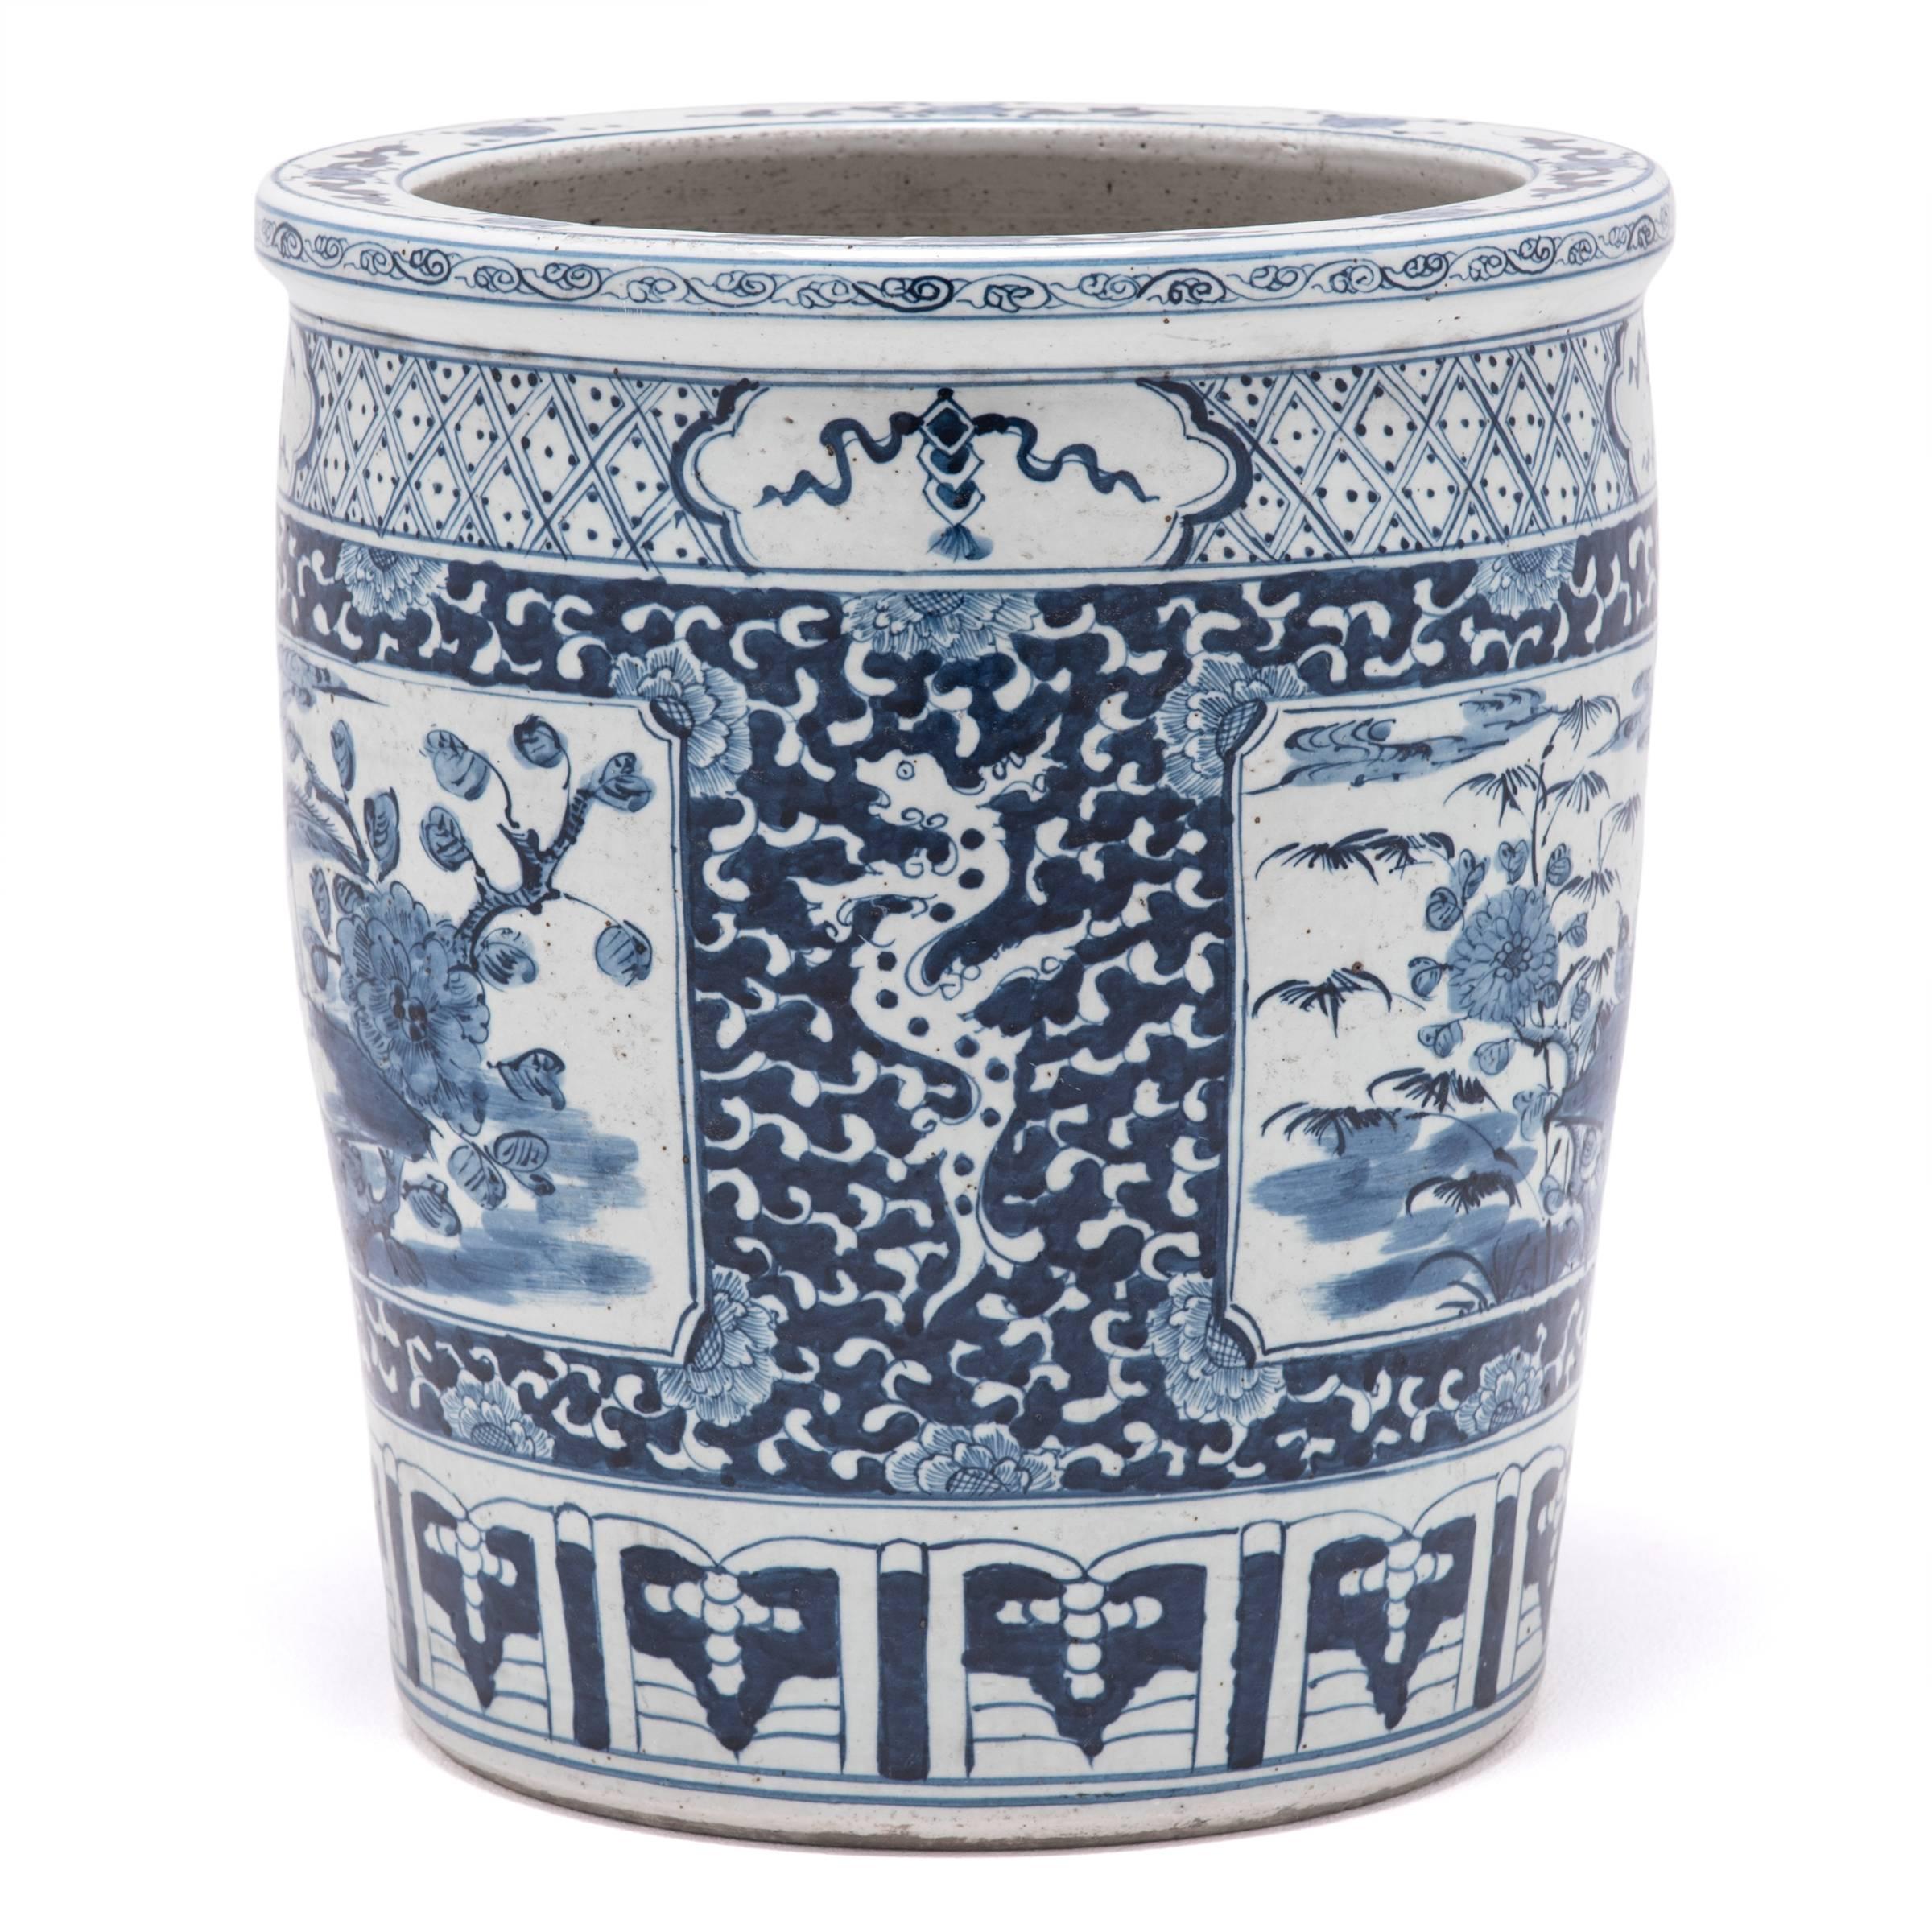 This contemporary vase from Zhejiang province turns a fond eye to China’s esteemed blue-and-white porcelain tradition. Invoking the romance of the scholar’s studio, the vase is described as a scroll jar, which traditionally was used to hold a